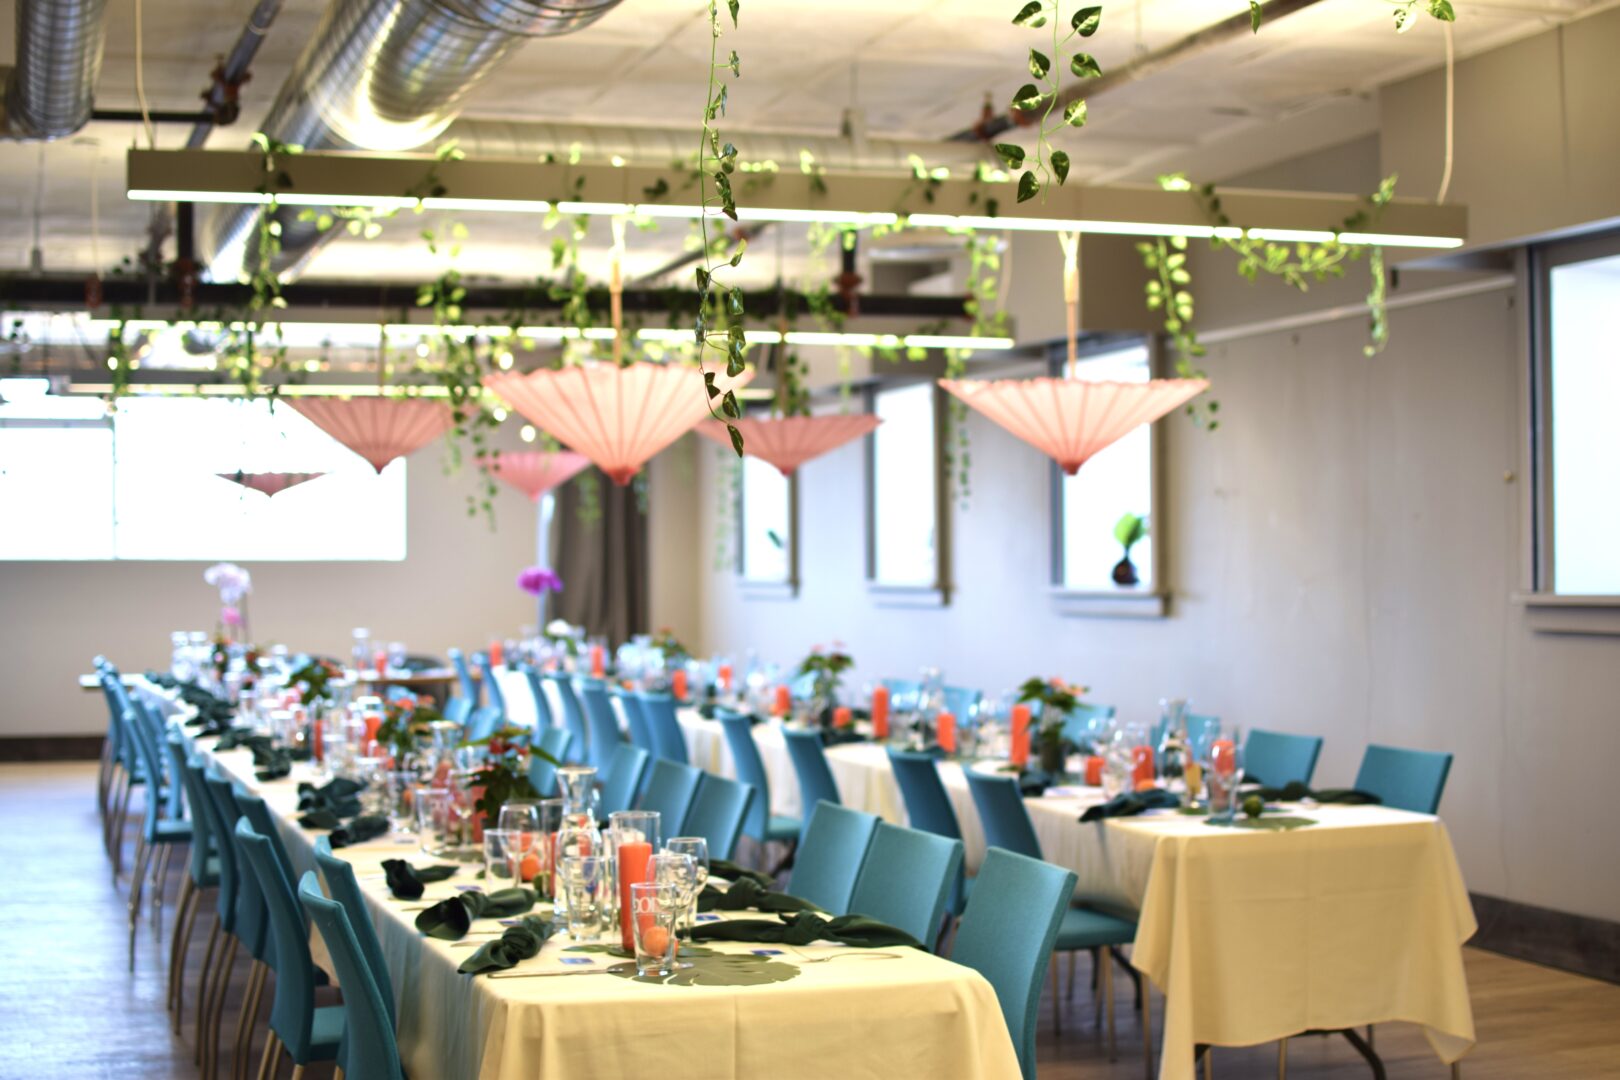 The fourth floor at 10C Shared Space is full of chairs and tables, along with colourful décor and upside-down umbrellas hanging from the ceiling. 